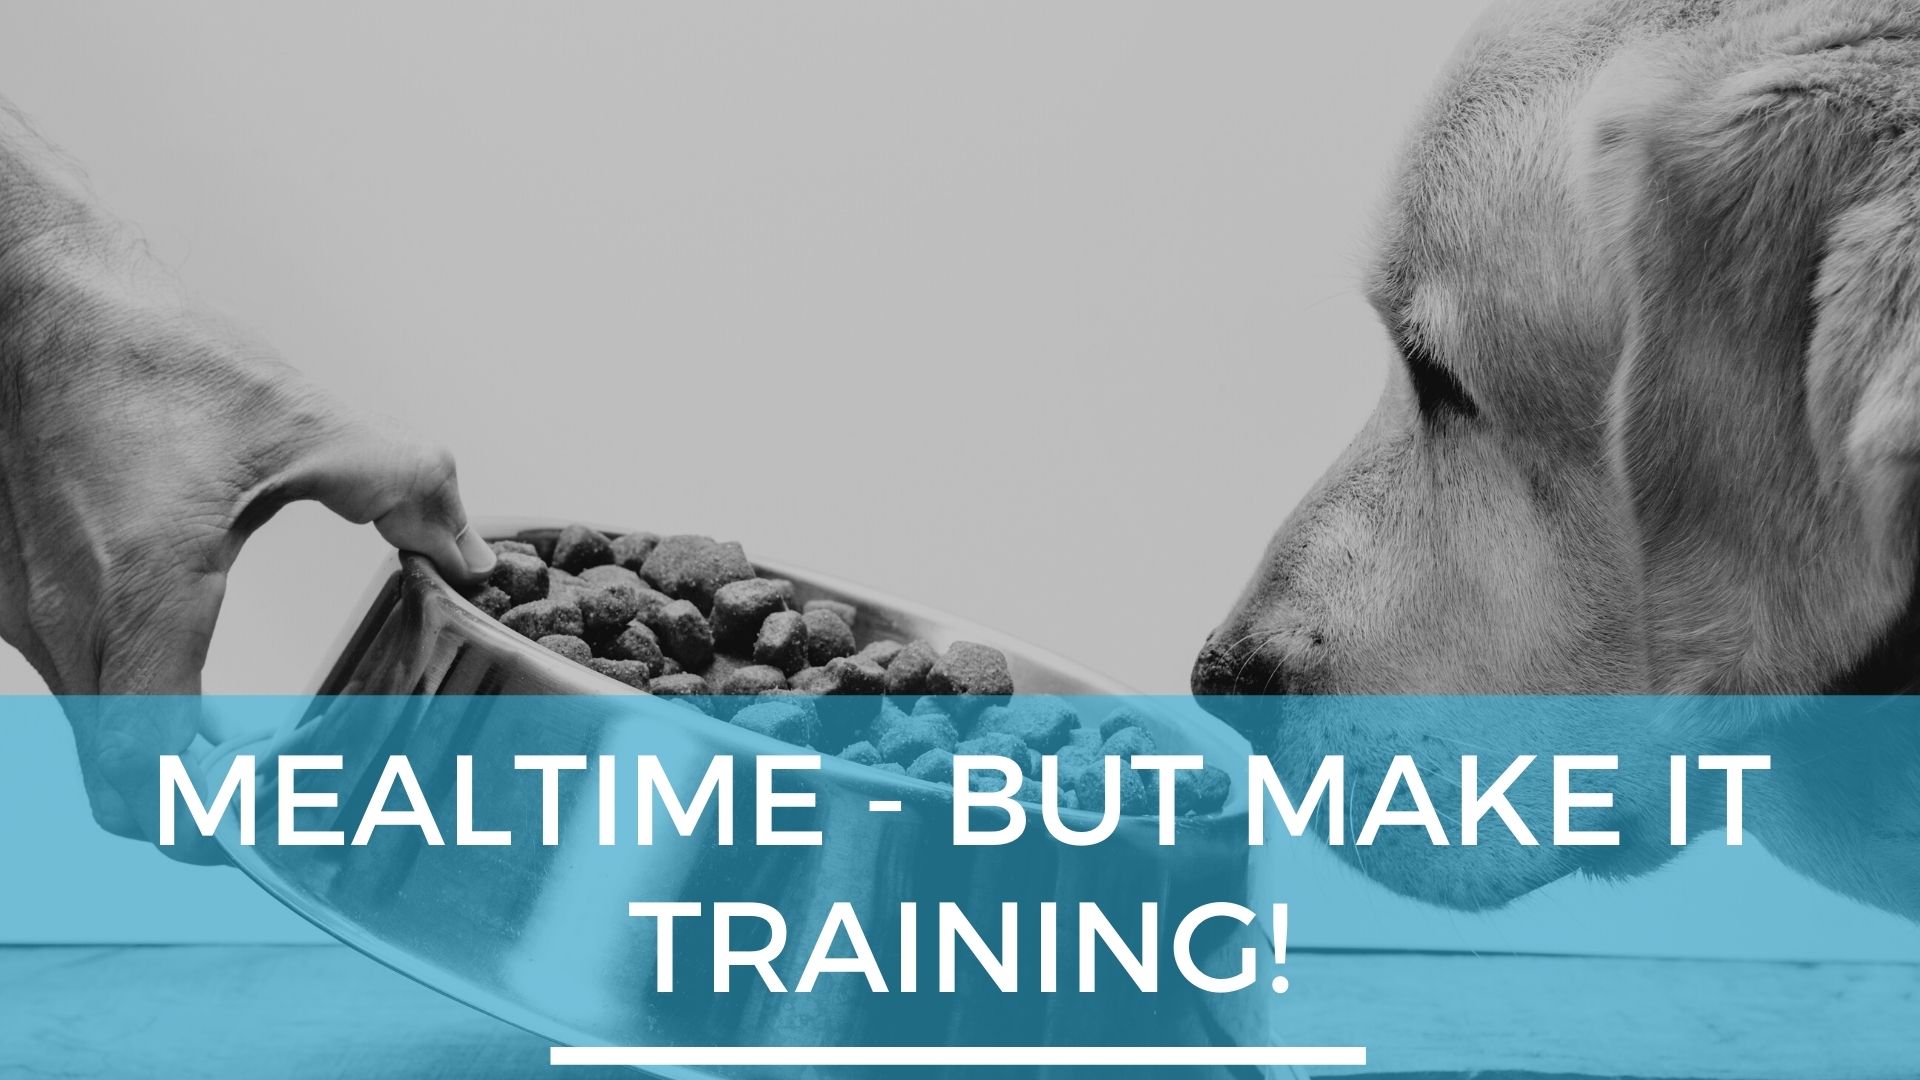 Dogs Meal Time - But Make it Training